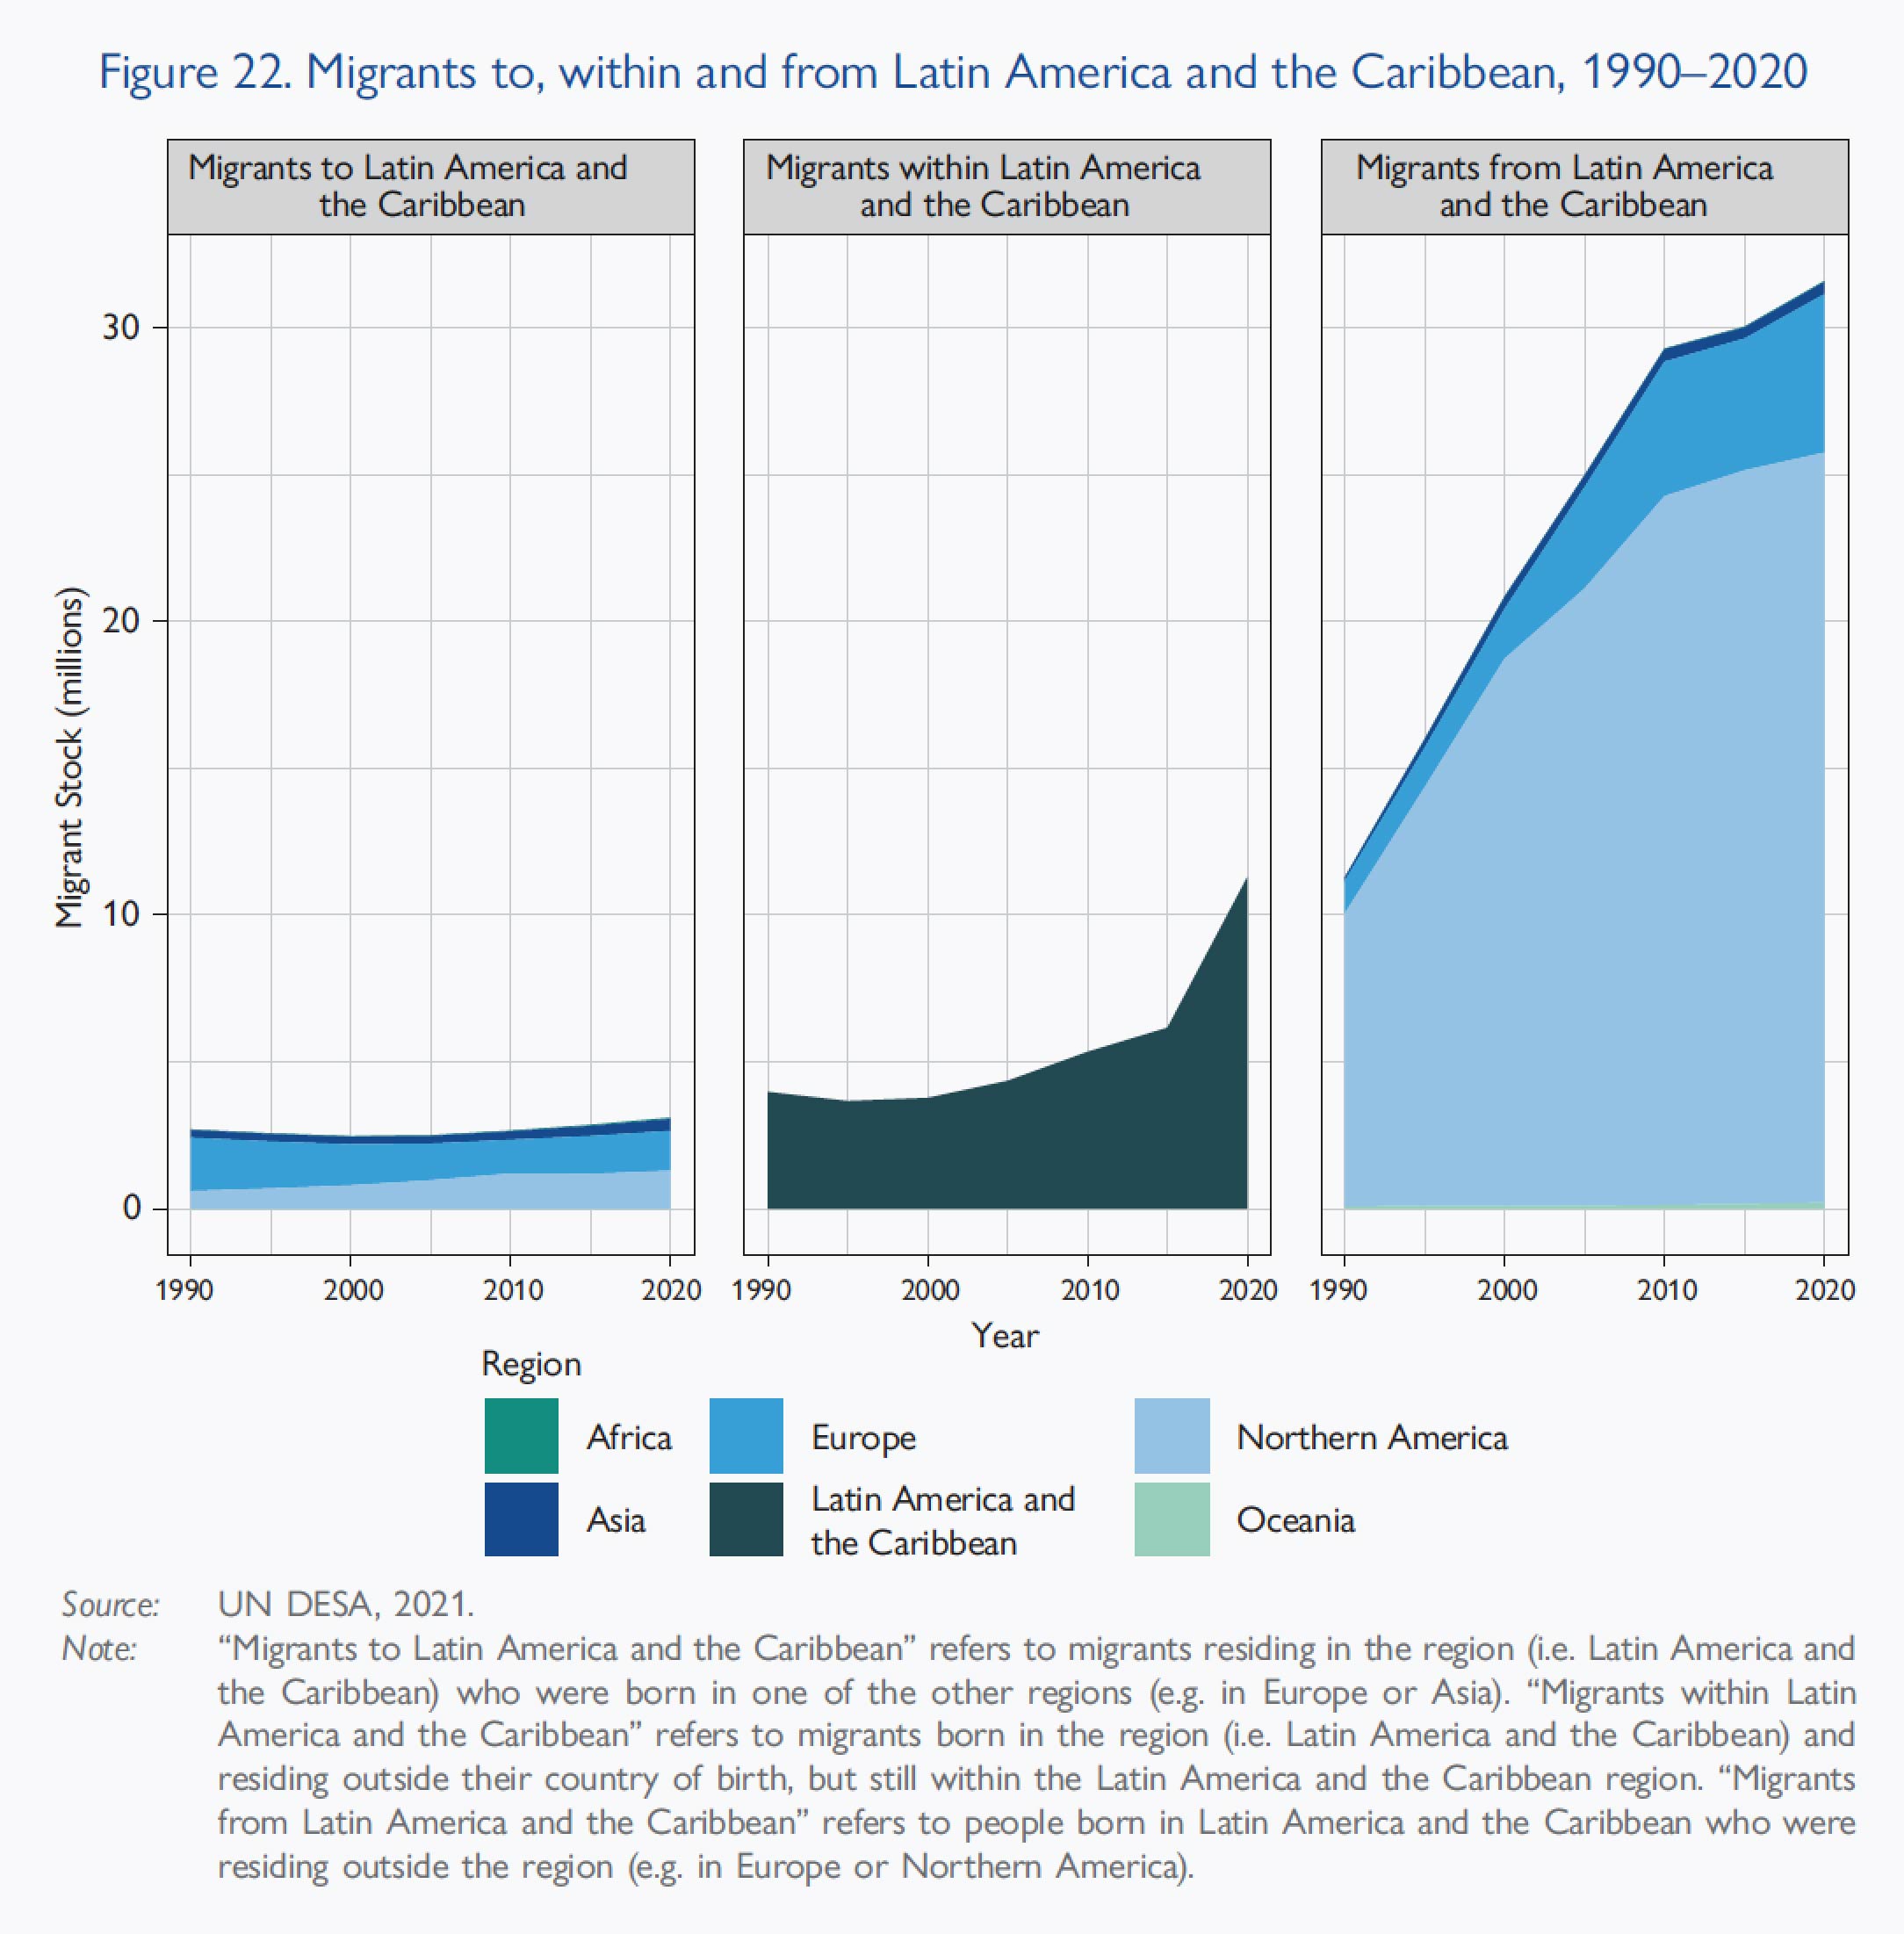 LAC and Caribbean migrants